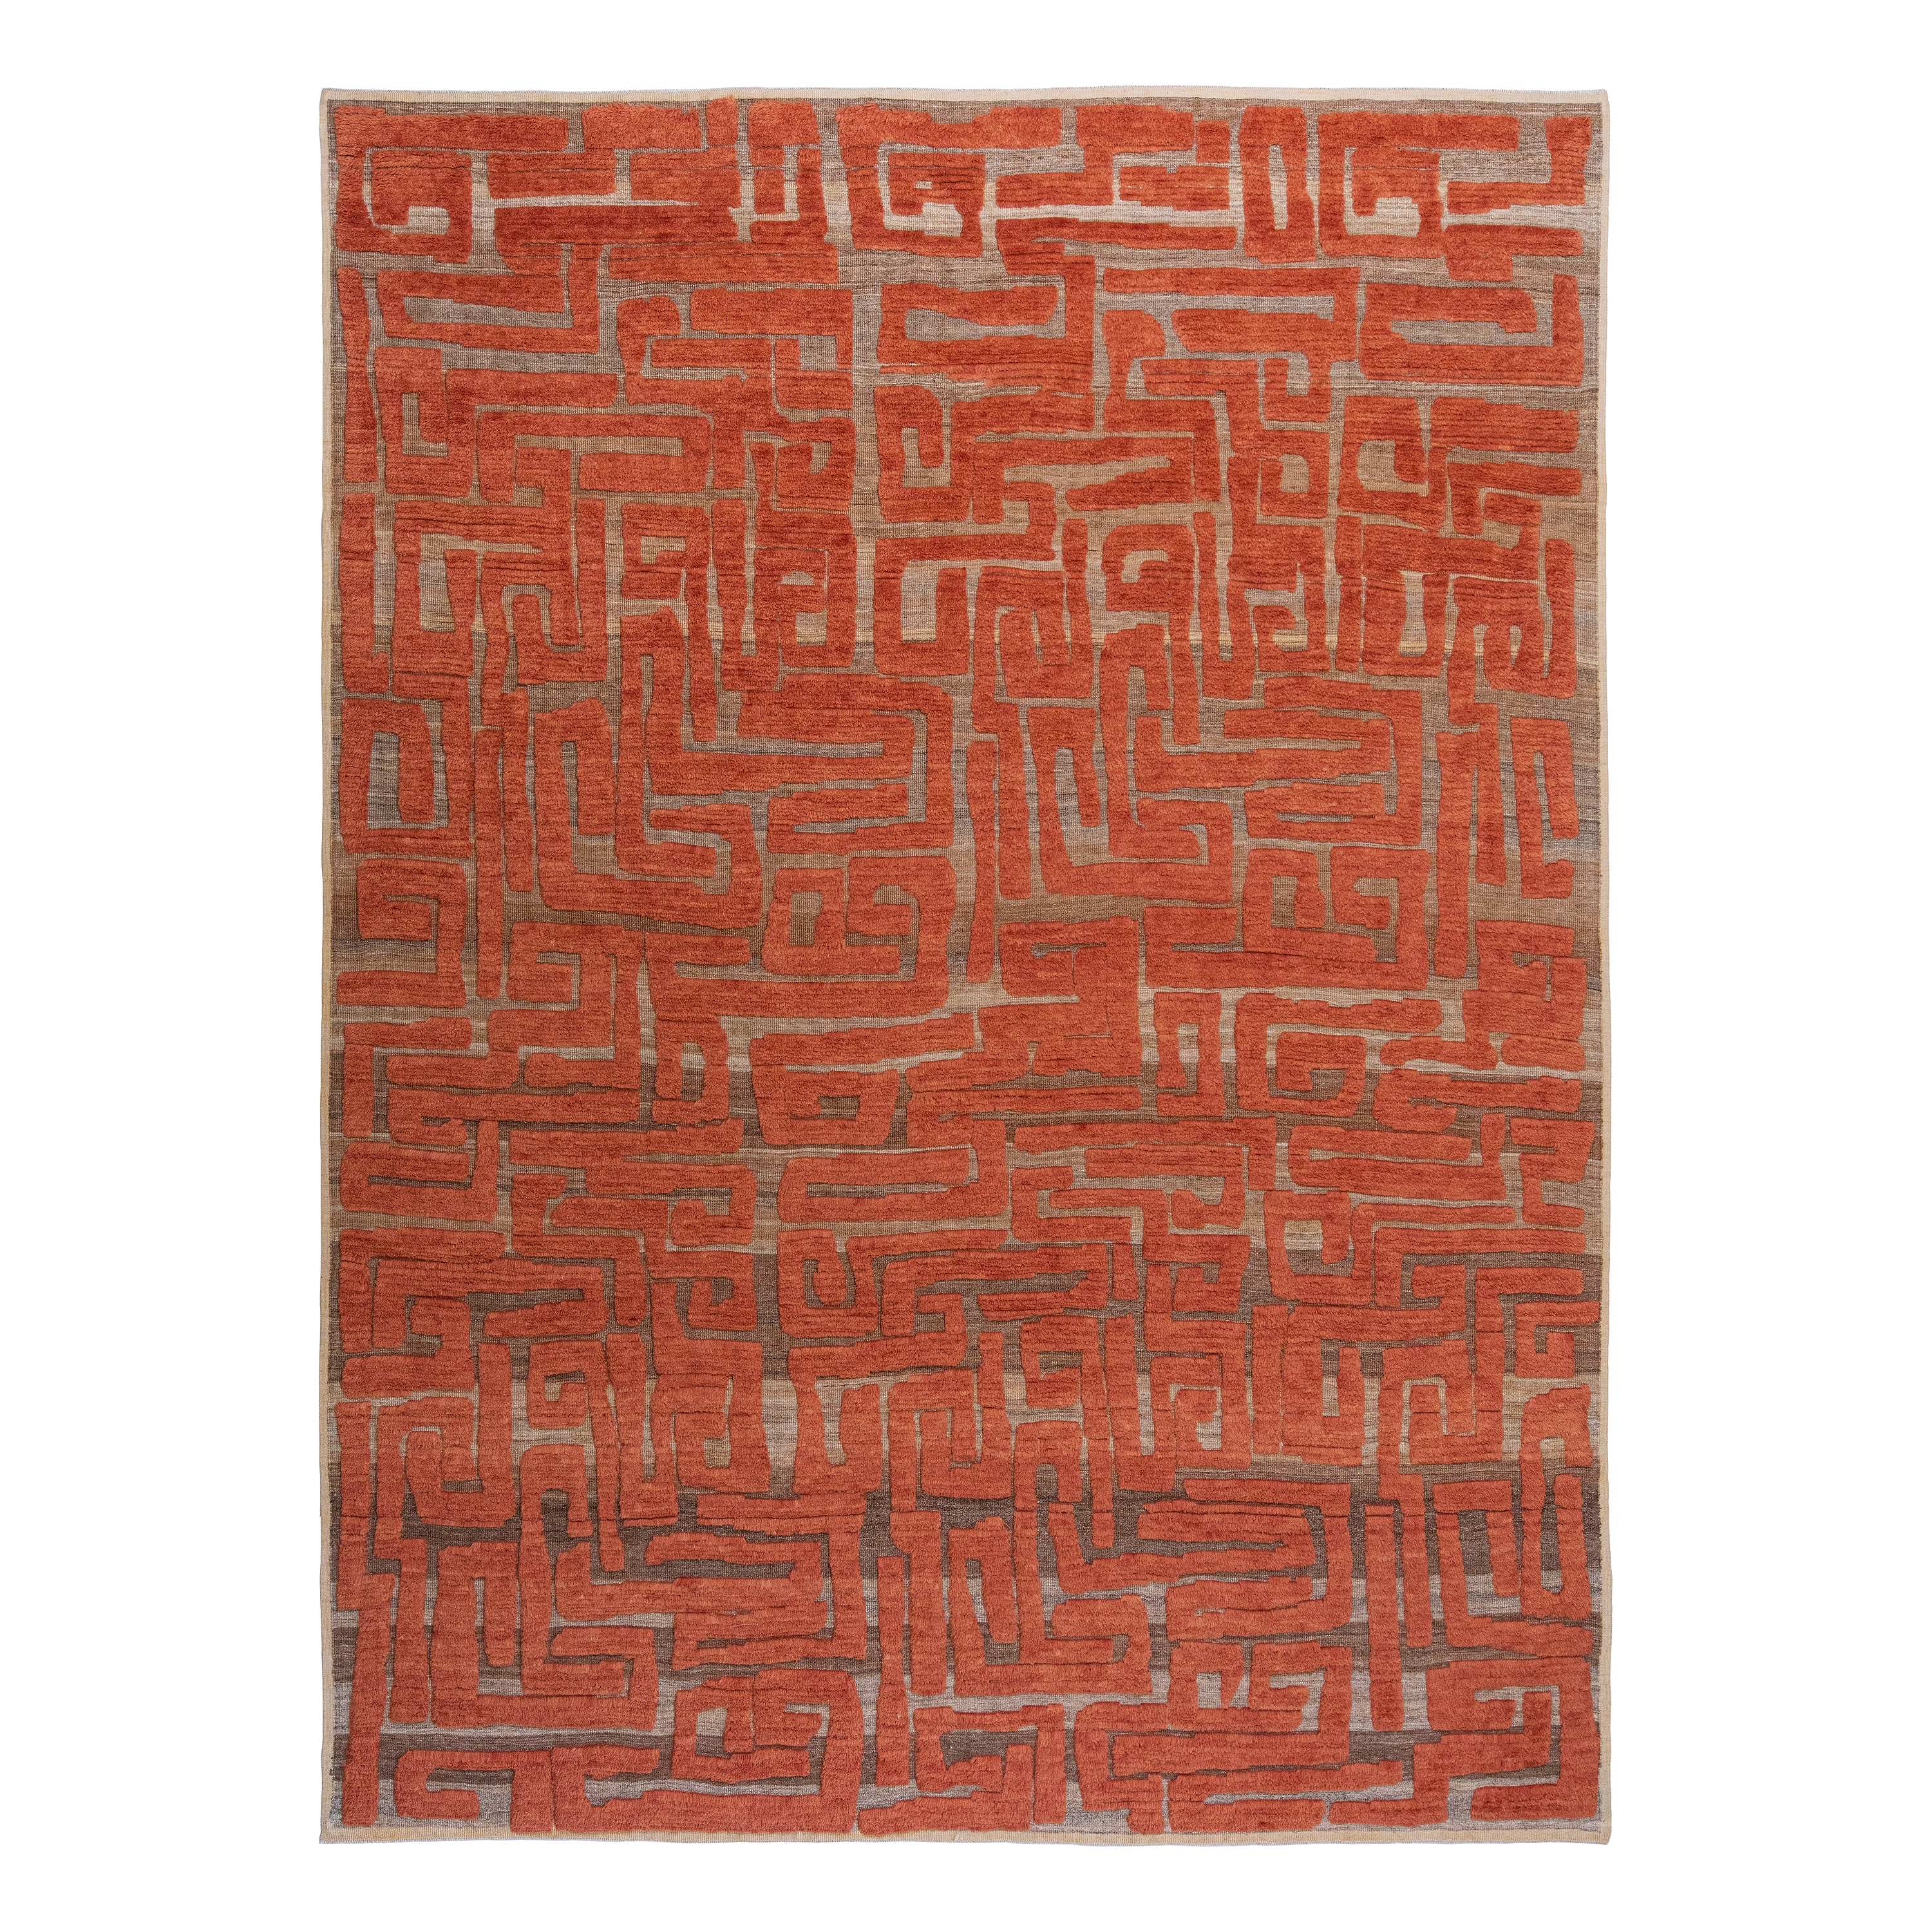 Maze rug is a modern, tribal rug of intricate patterns, inspired by traditional African Kuba cloths. 